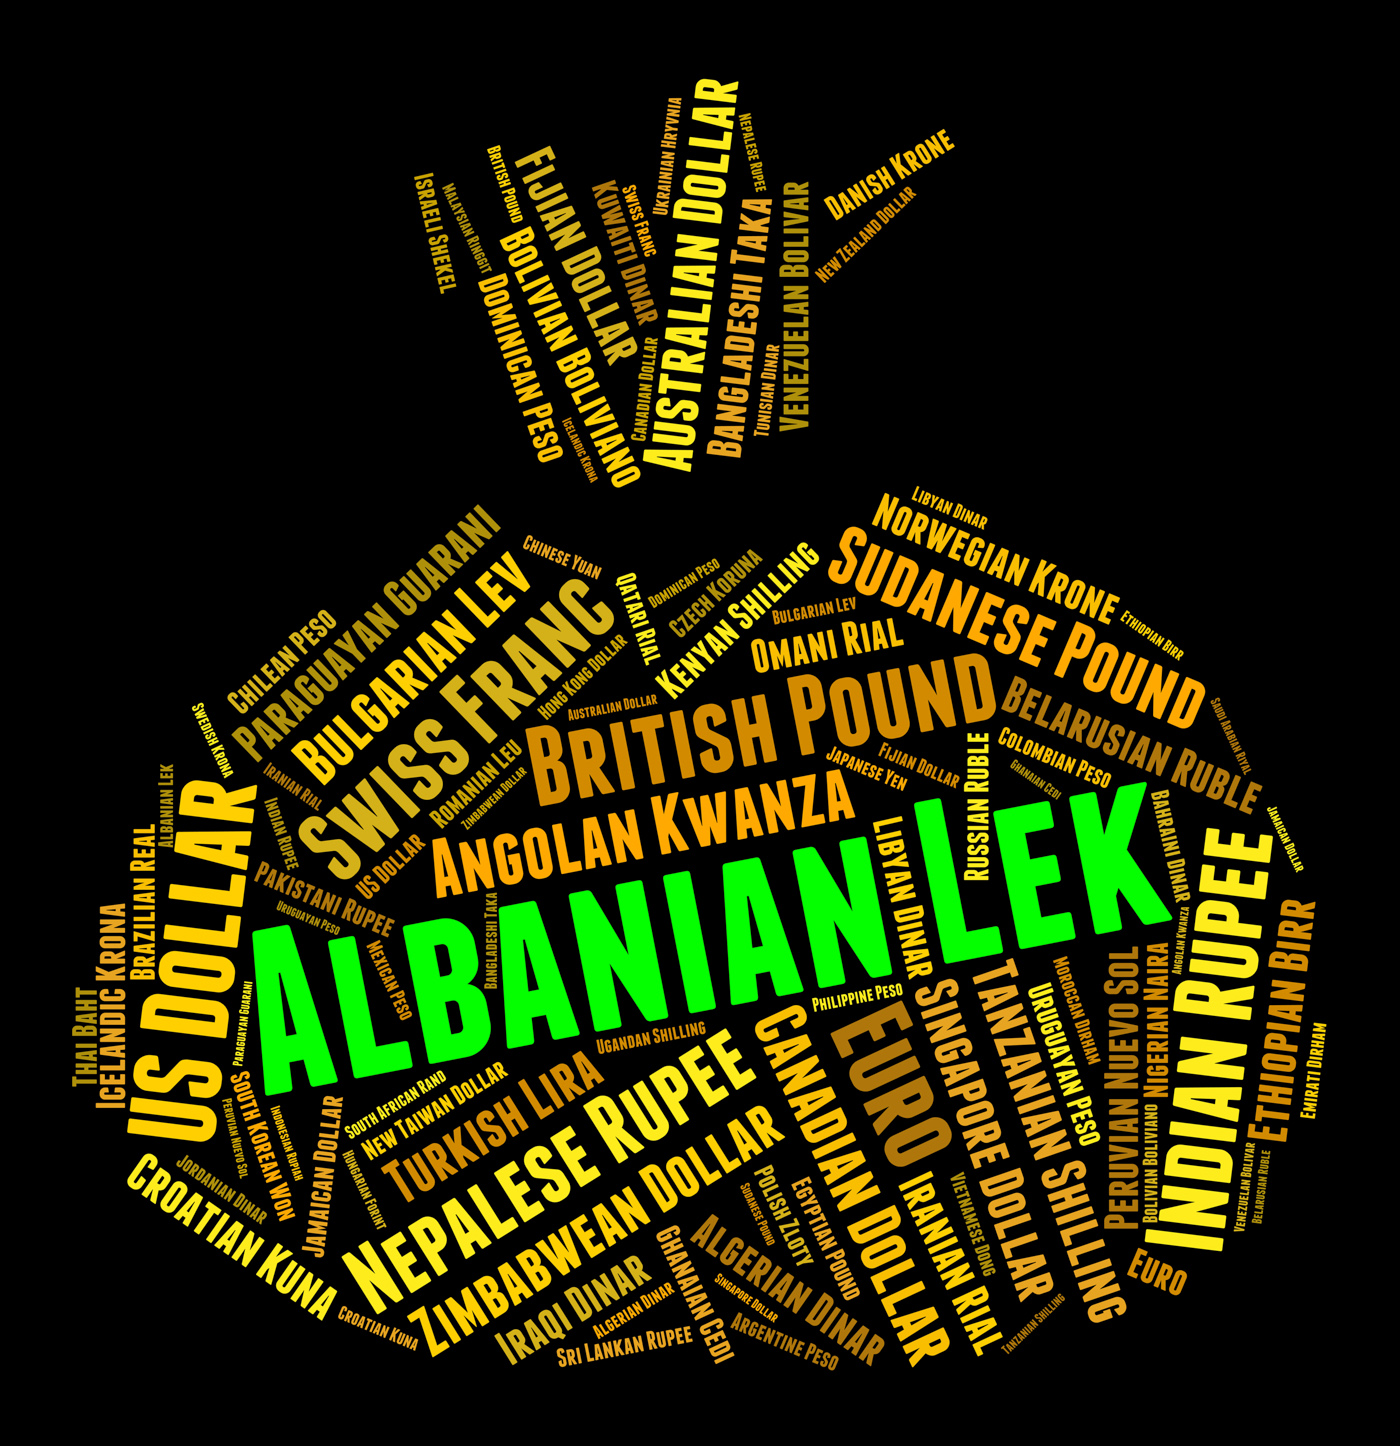 Albanian lek represents foreign currency and currencies photo